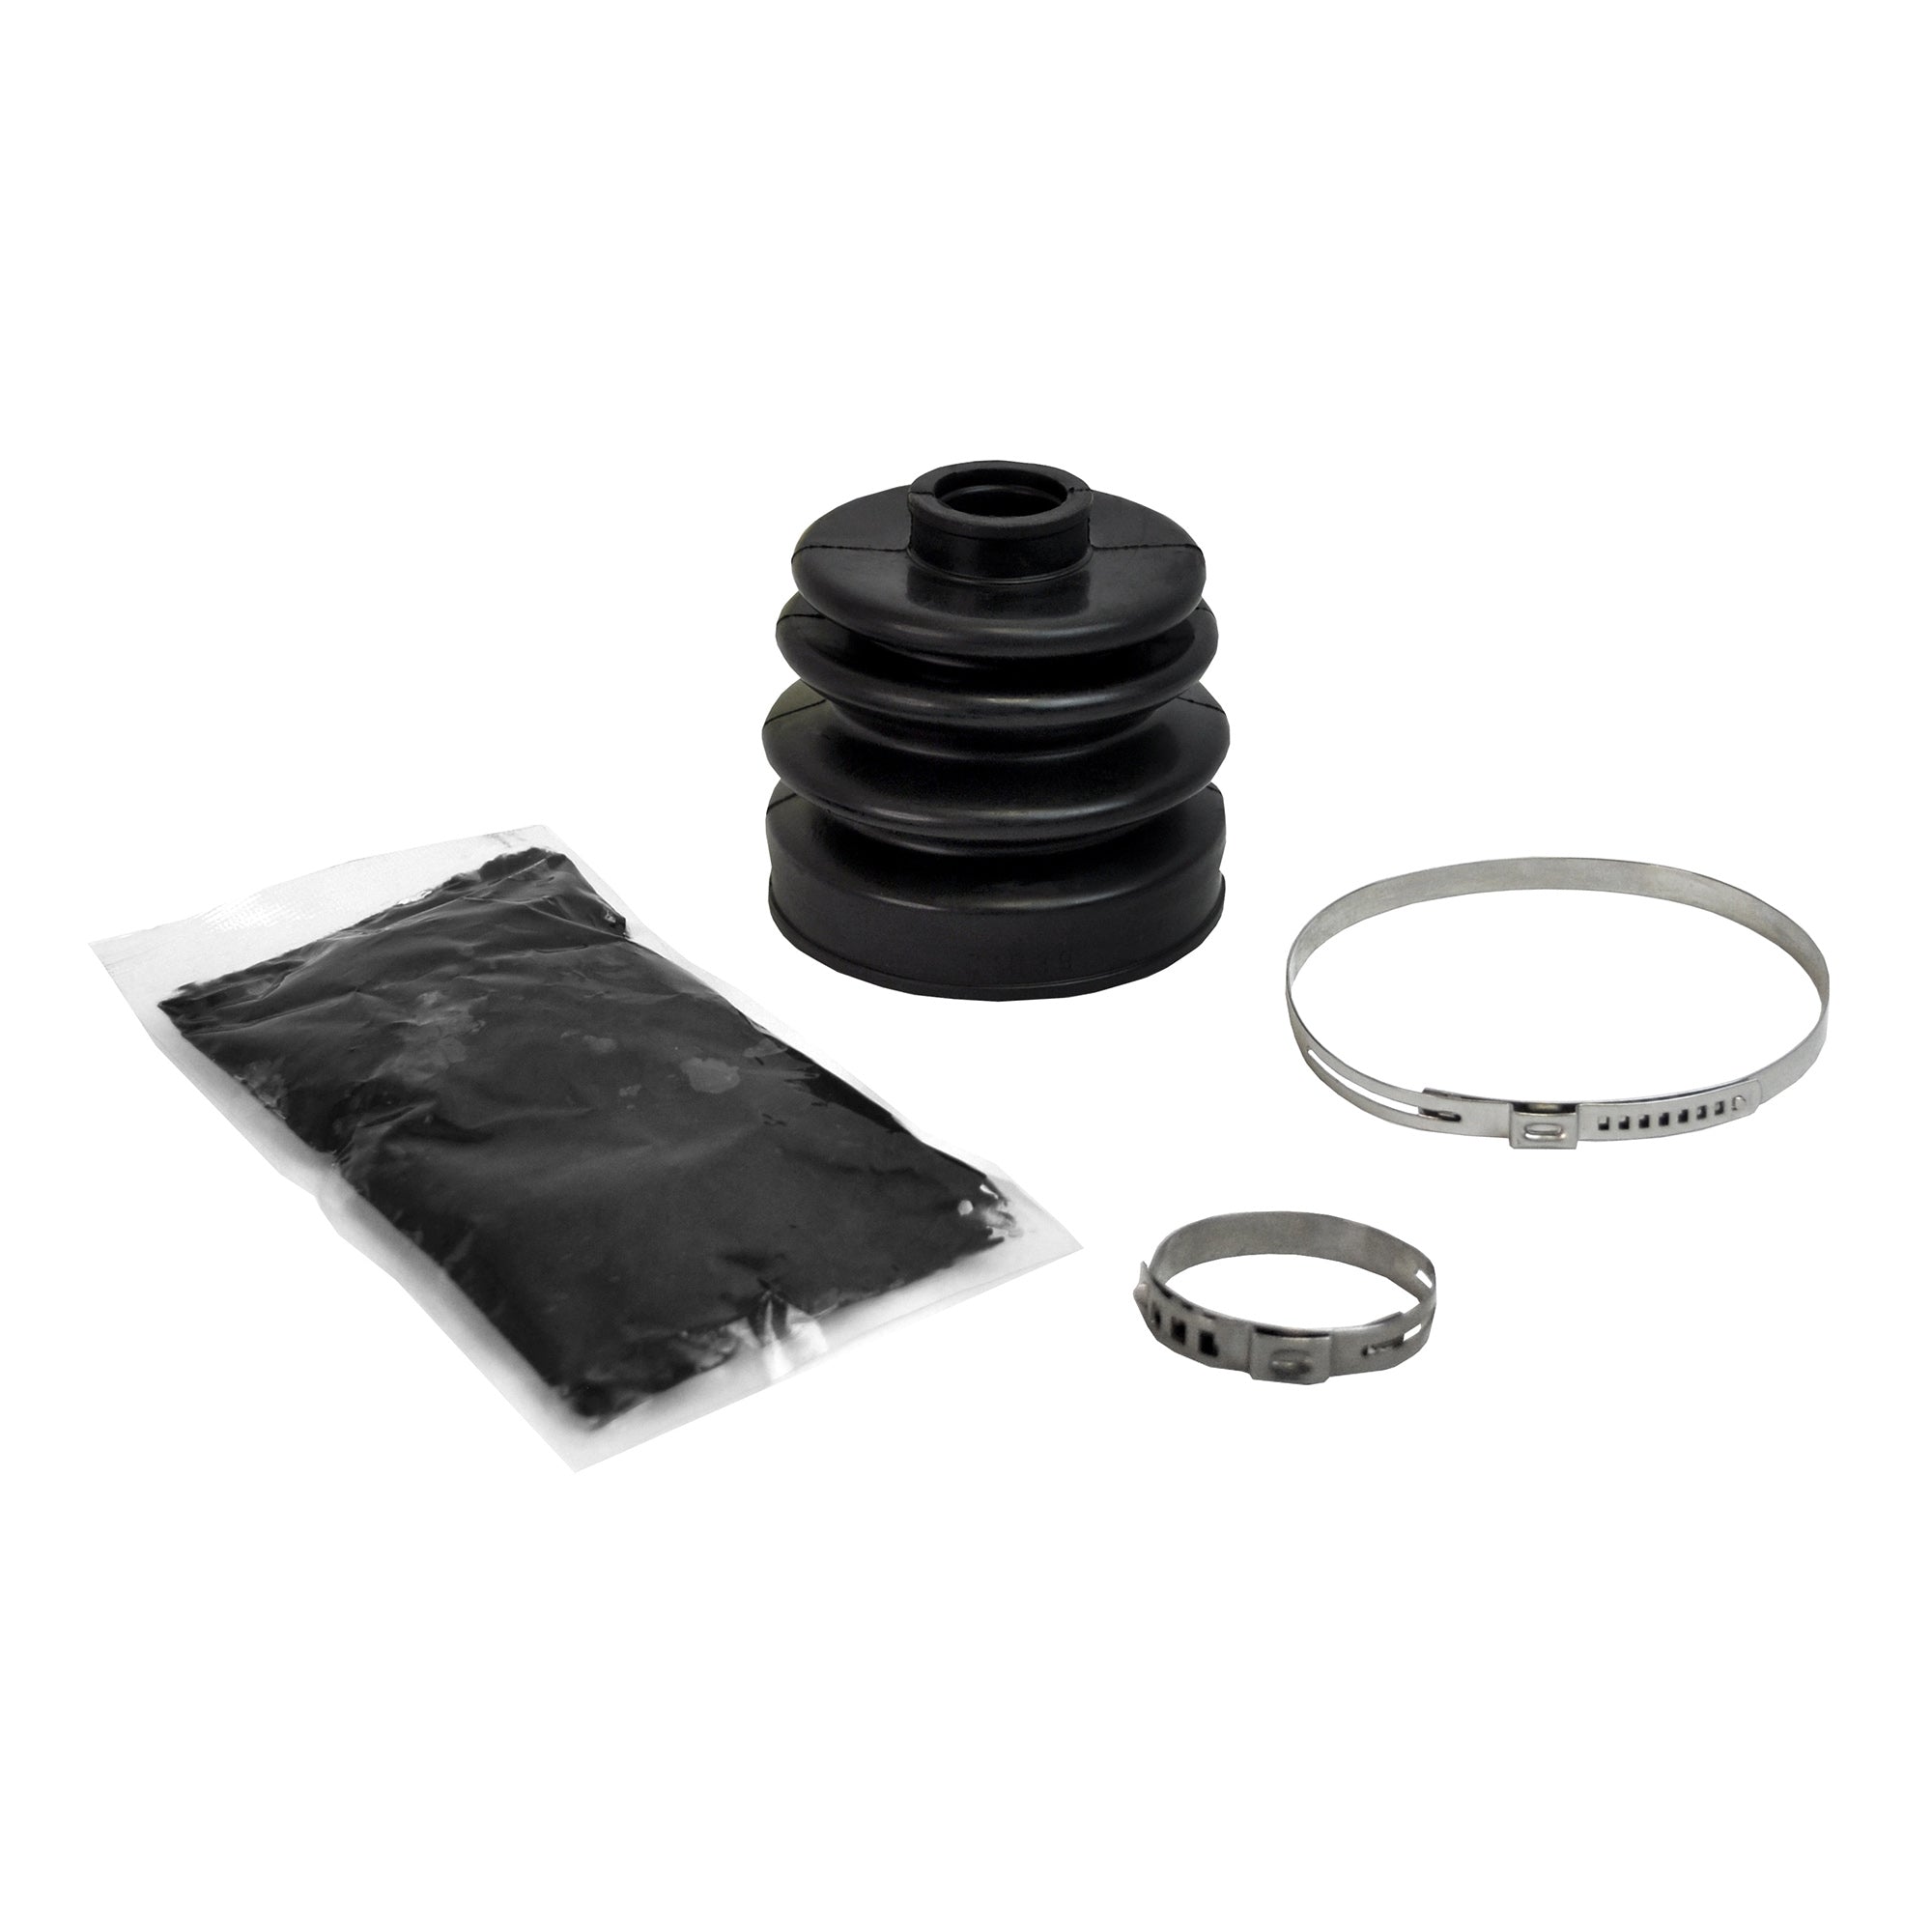 Polaris RZR 1000 Rugged OE Replacement Boot Kit